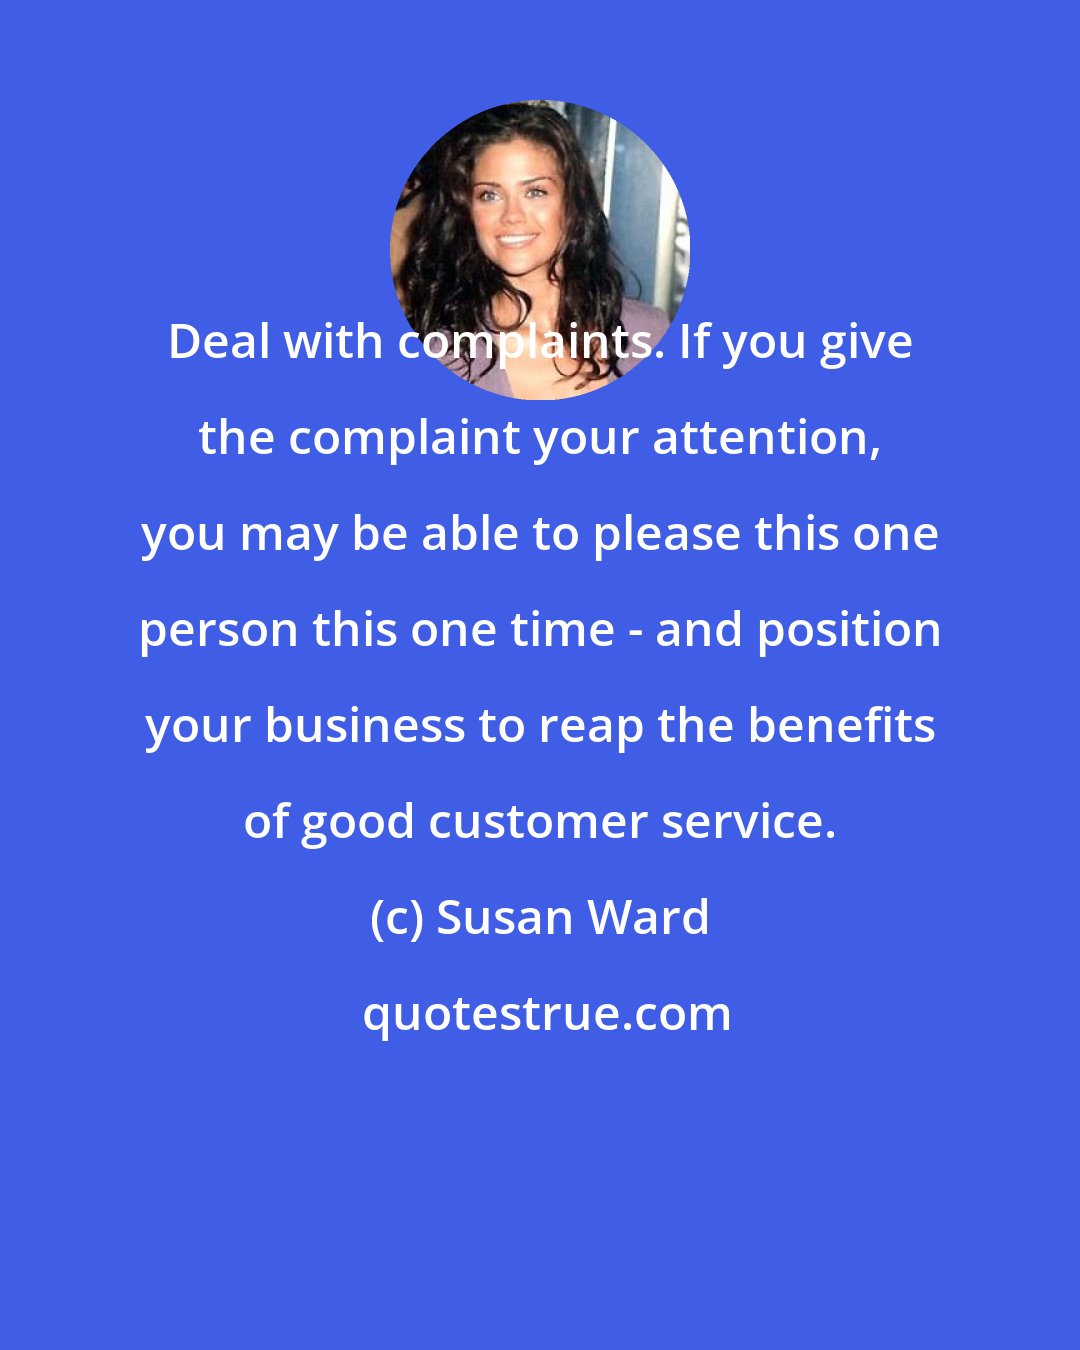 Susan Ward: Deal with complaints. If you give the complaint your attention, you may be able to please this one person this one time - and position your business to reap the benefits of good customer service.